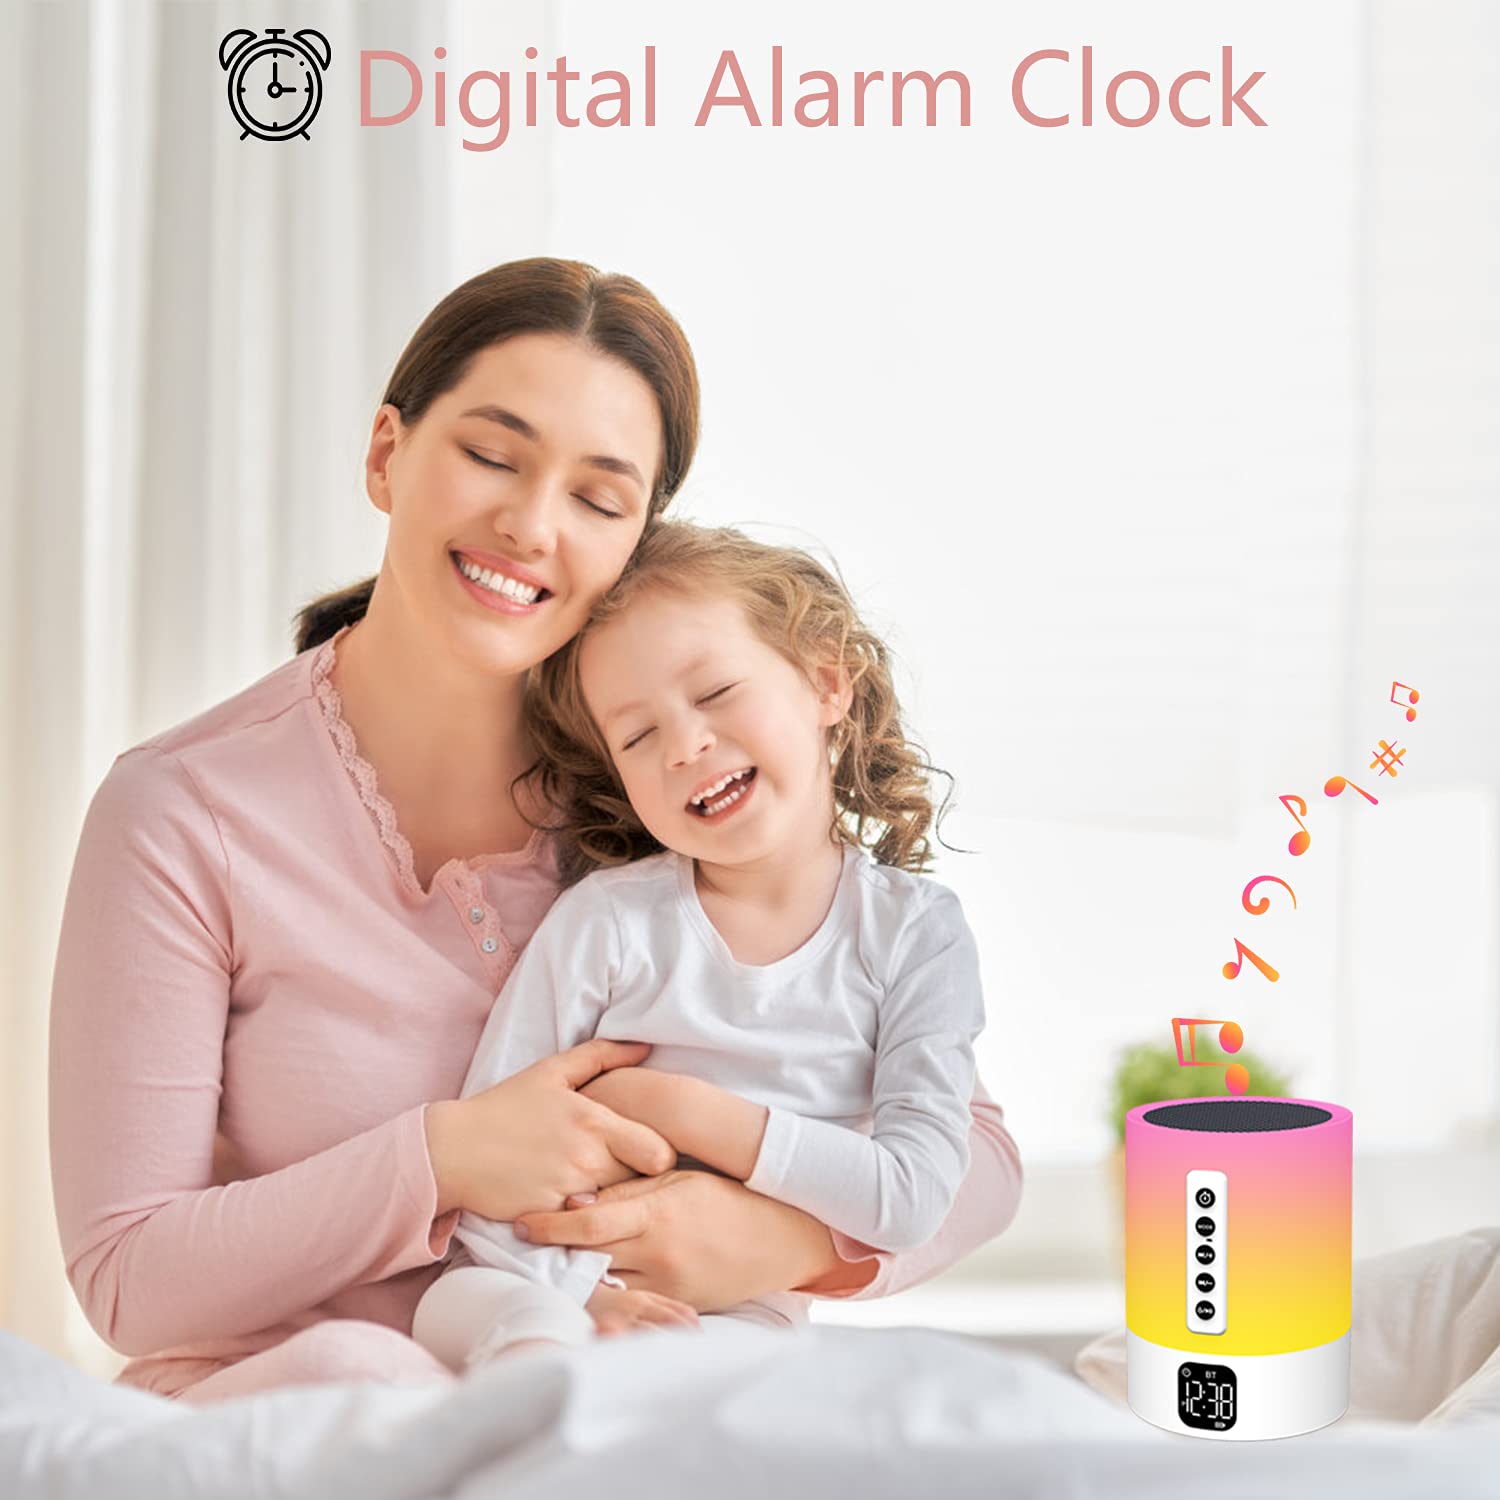 Night Light Bluetooth Speaker, Alarm Clock Bluetooth Speaker,Bedside Lamp with Alarm Clock,White Noise Machine,Dimmable Color Changing Table Lamp Bedroom Gifts for Teenage Girls Boys Kids Women Teens